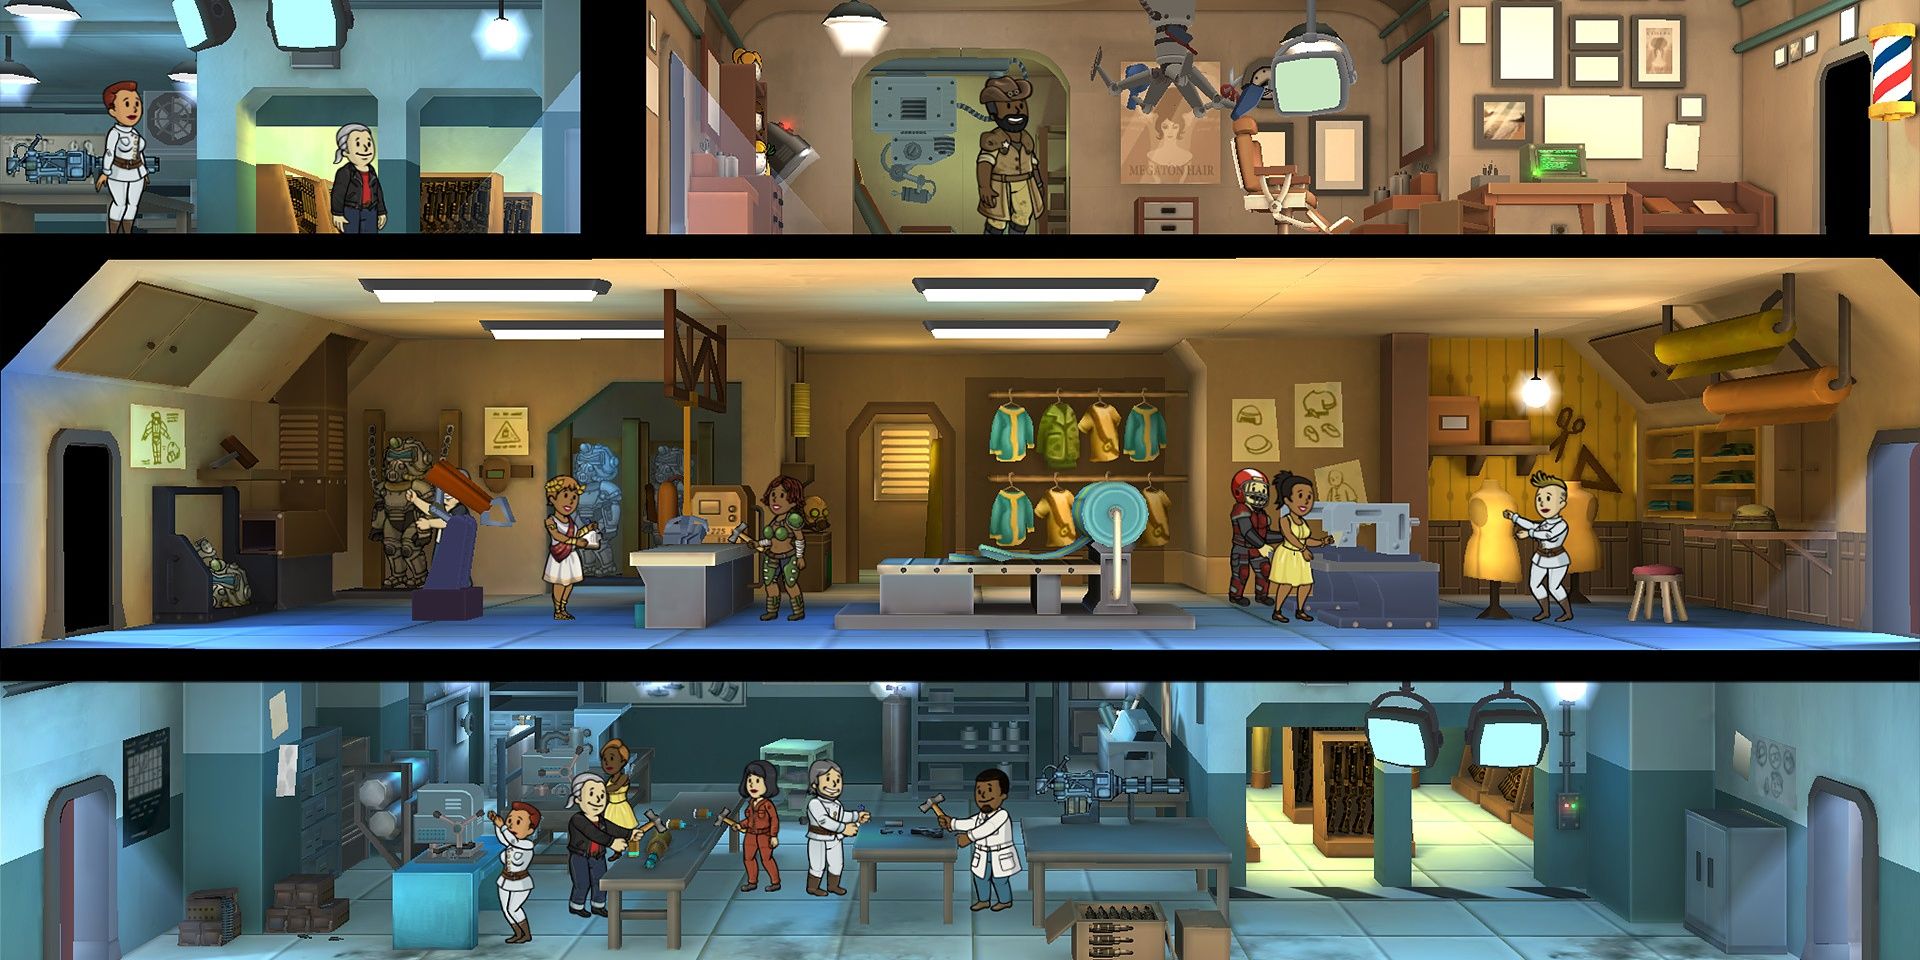 Many floors and rooms for a base in Fallout Shelter